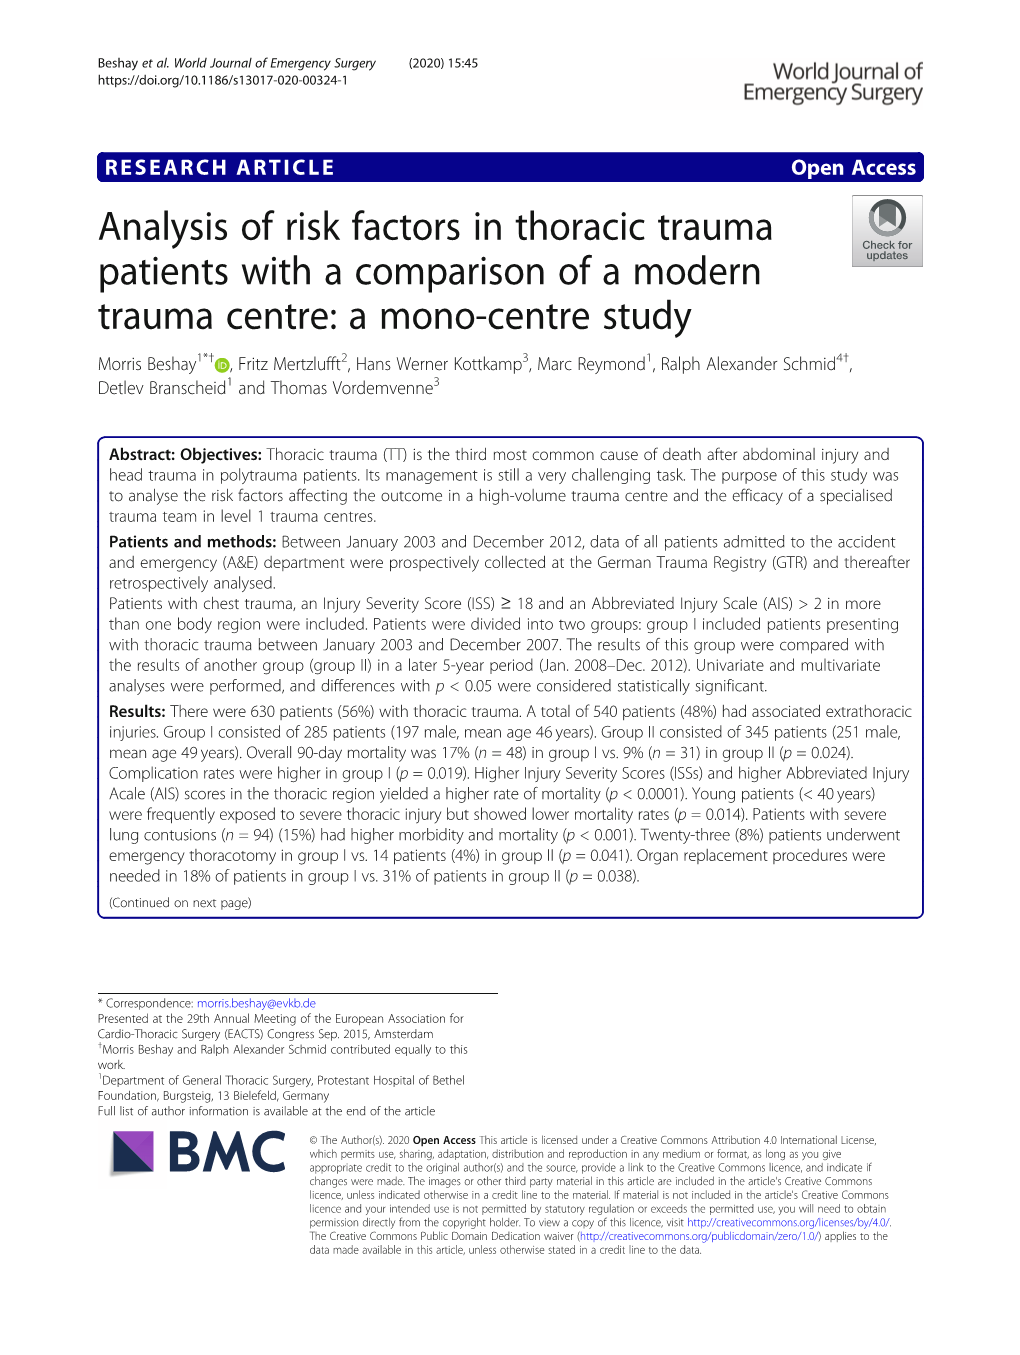 Analysis of Risk Factors in Thoracic Trauma Patients with a Comparison